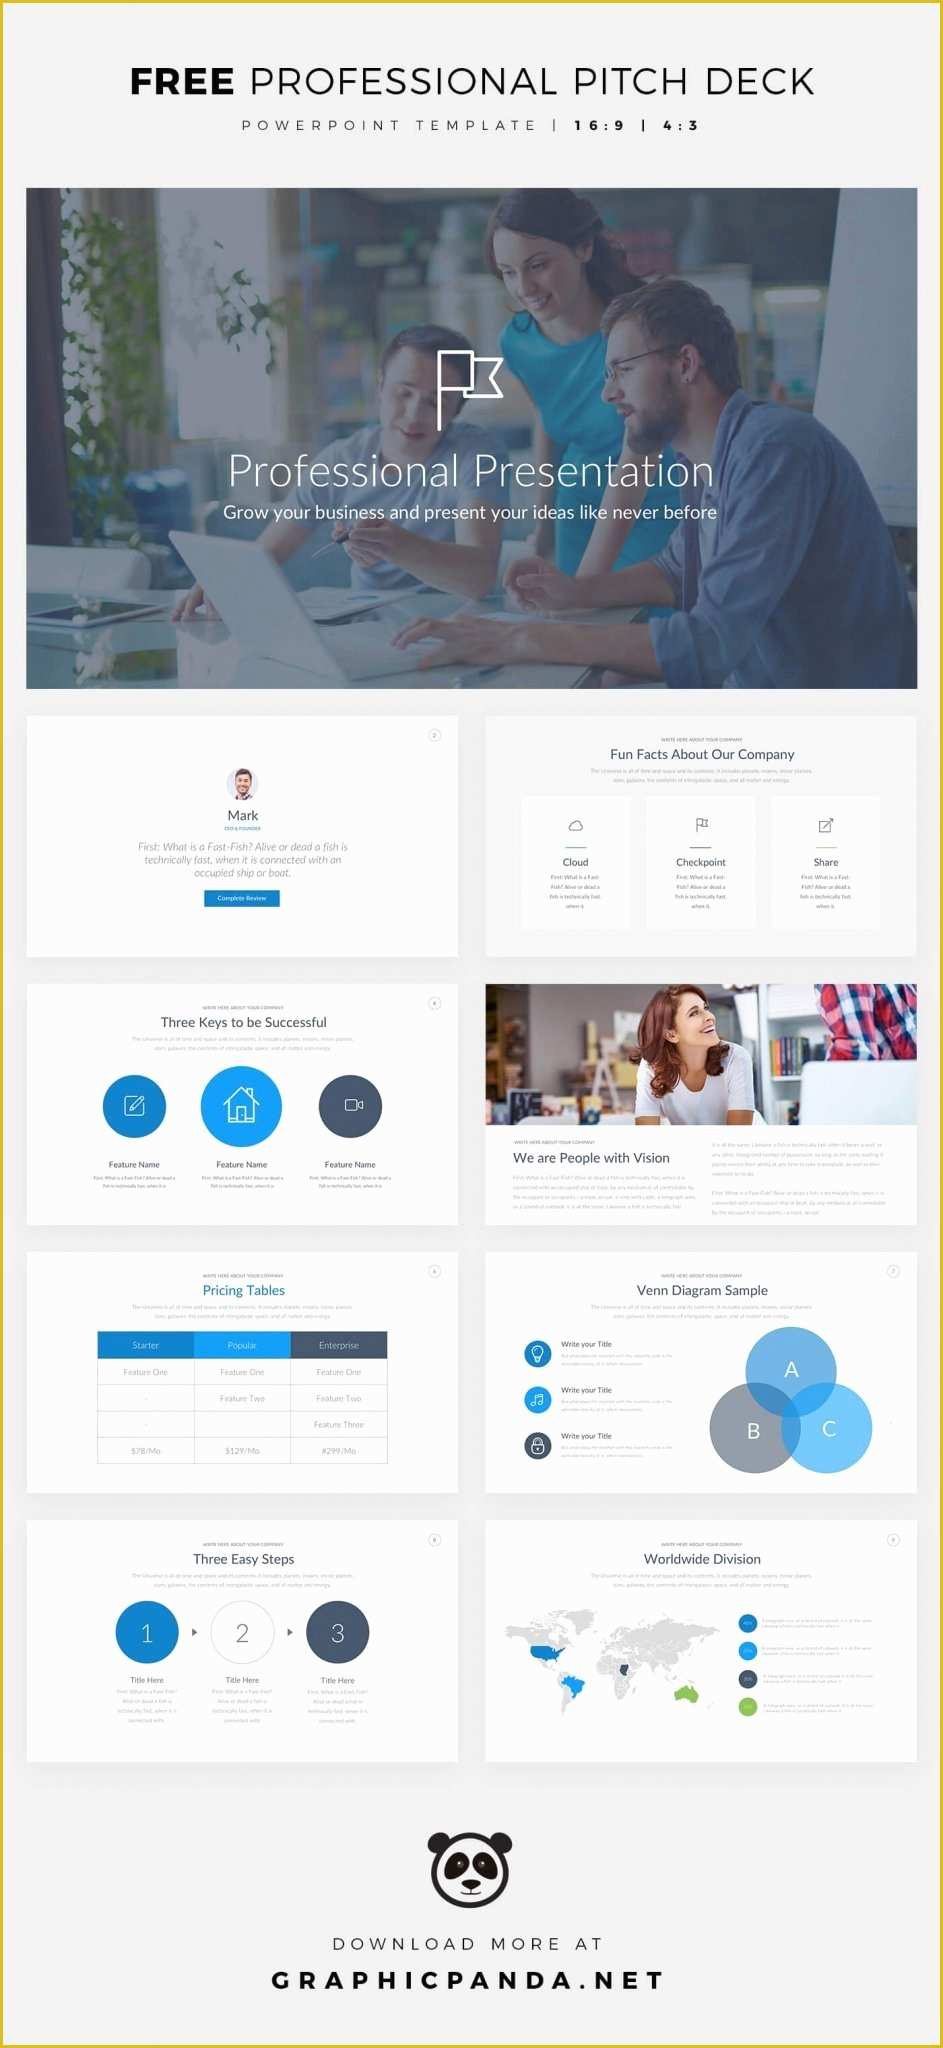 Pitch Deck Template Powerpoint Free Download Of Free Powerpoint Template Pitch Deck Presentation Ppt